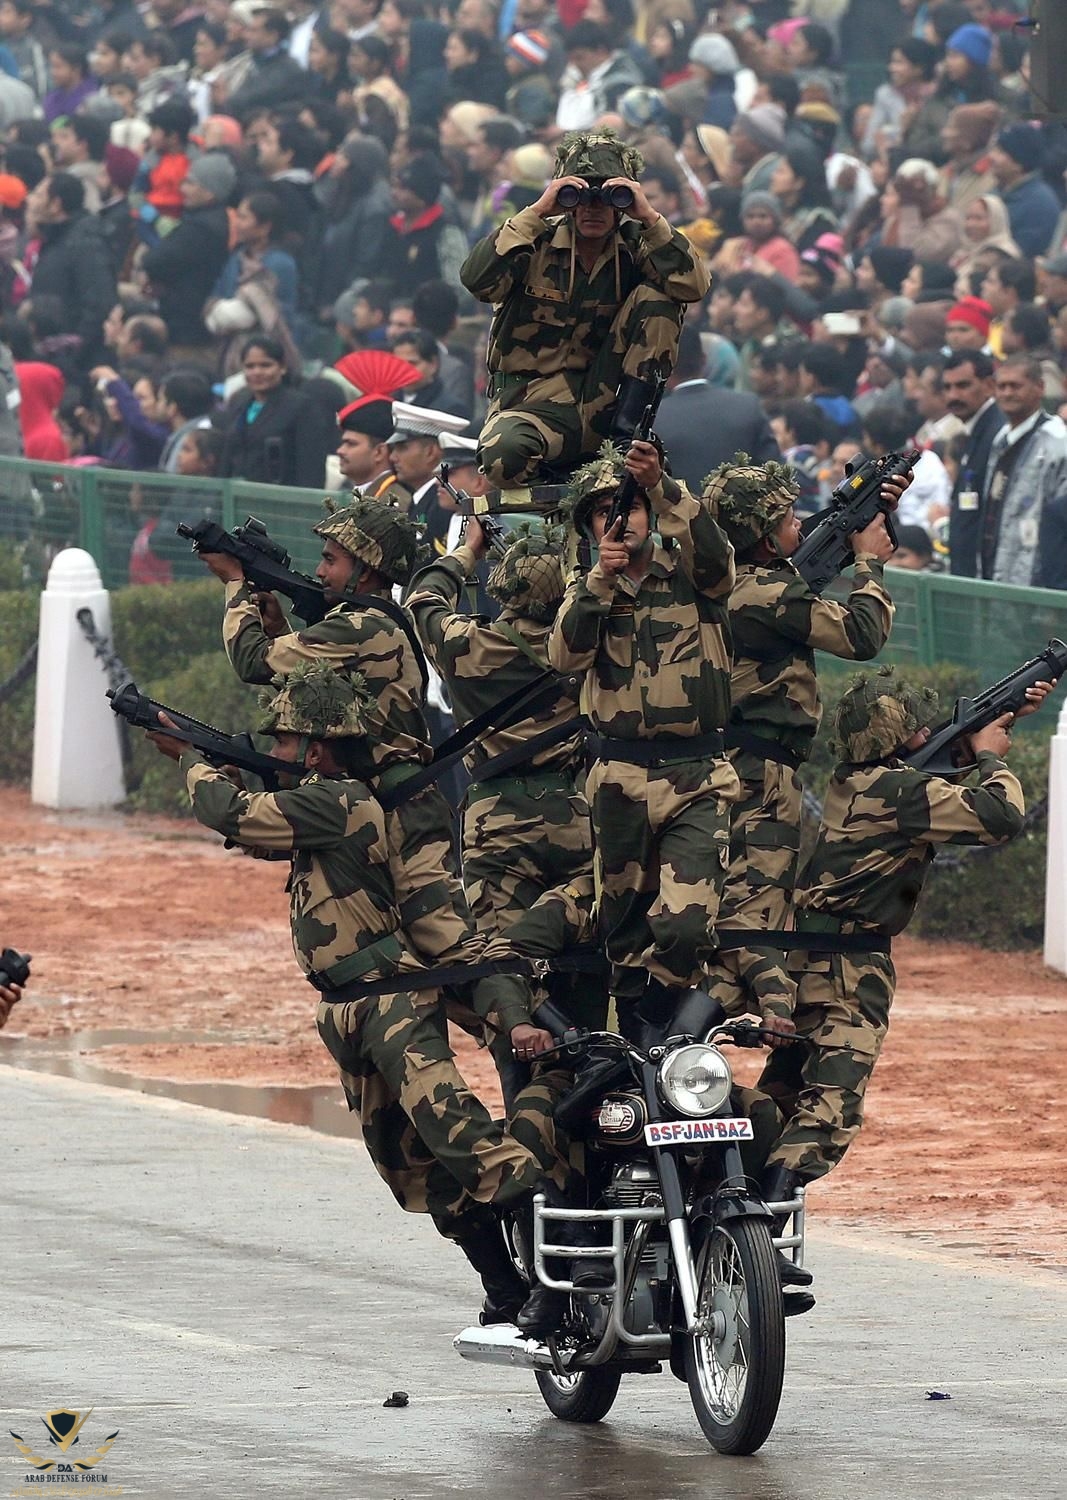 Indian Border Security Force performing motorcycle acrobatics during 2015 Republic Day parade...jpeg